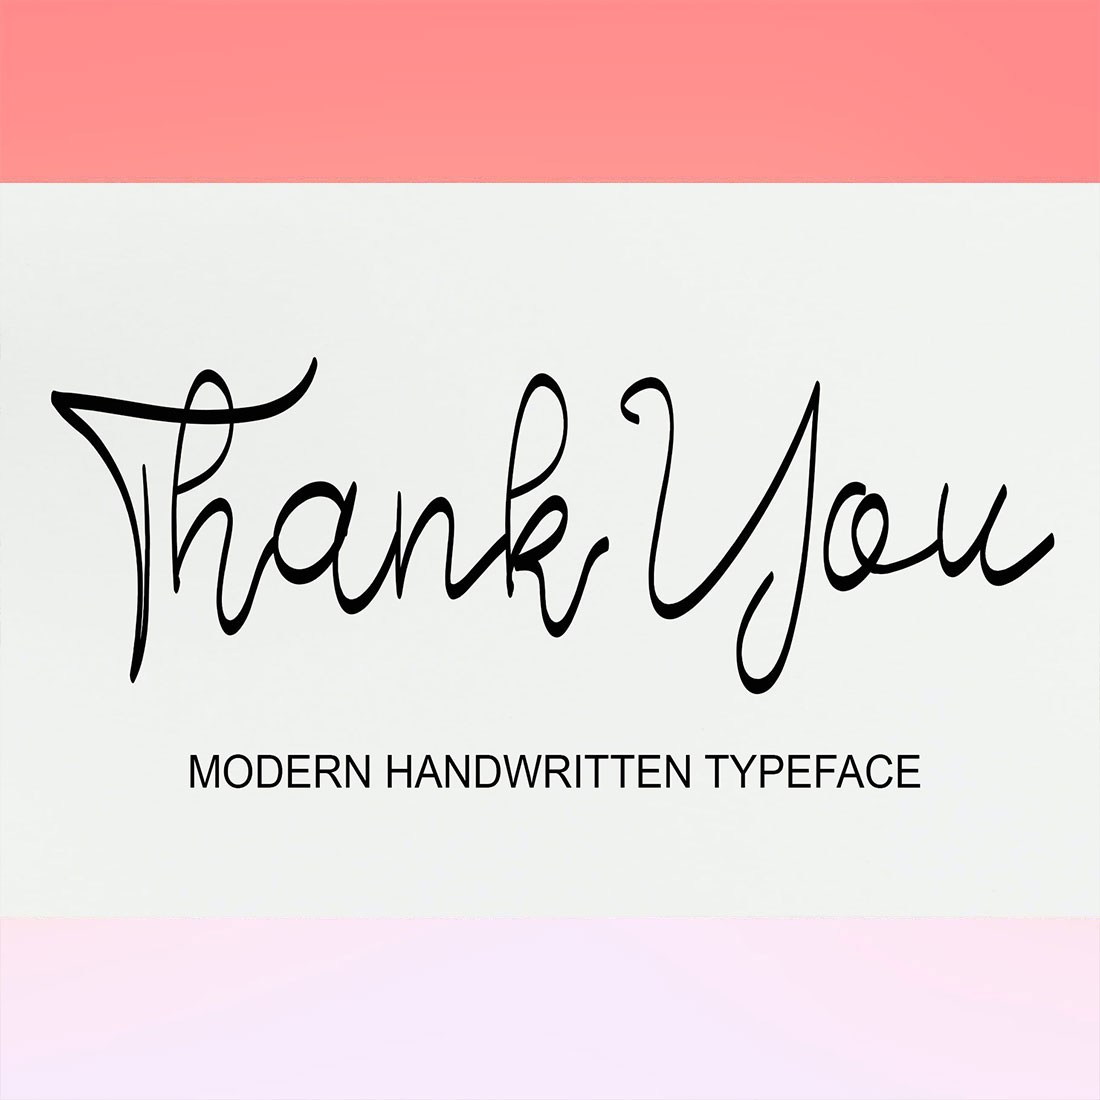 Thank card with the words modern handwriting typeface.